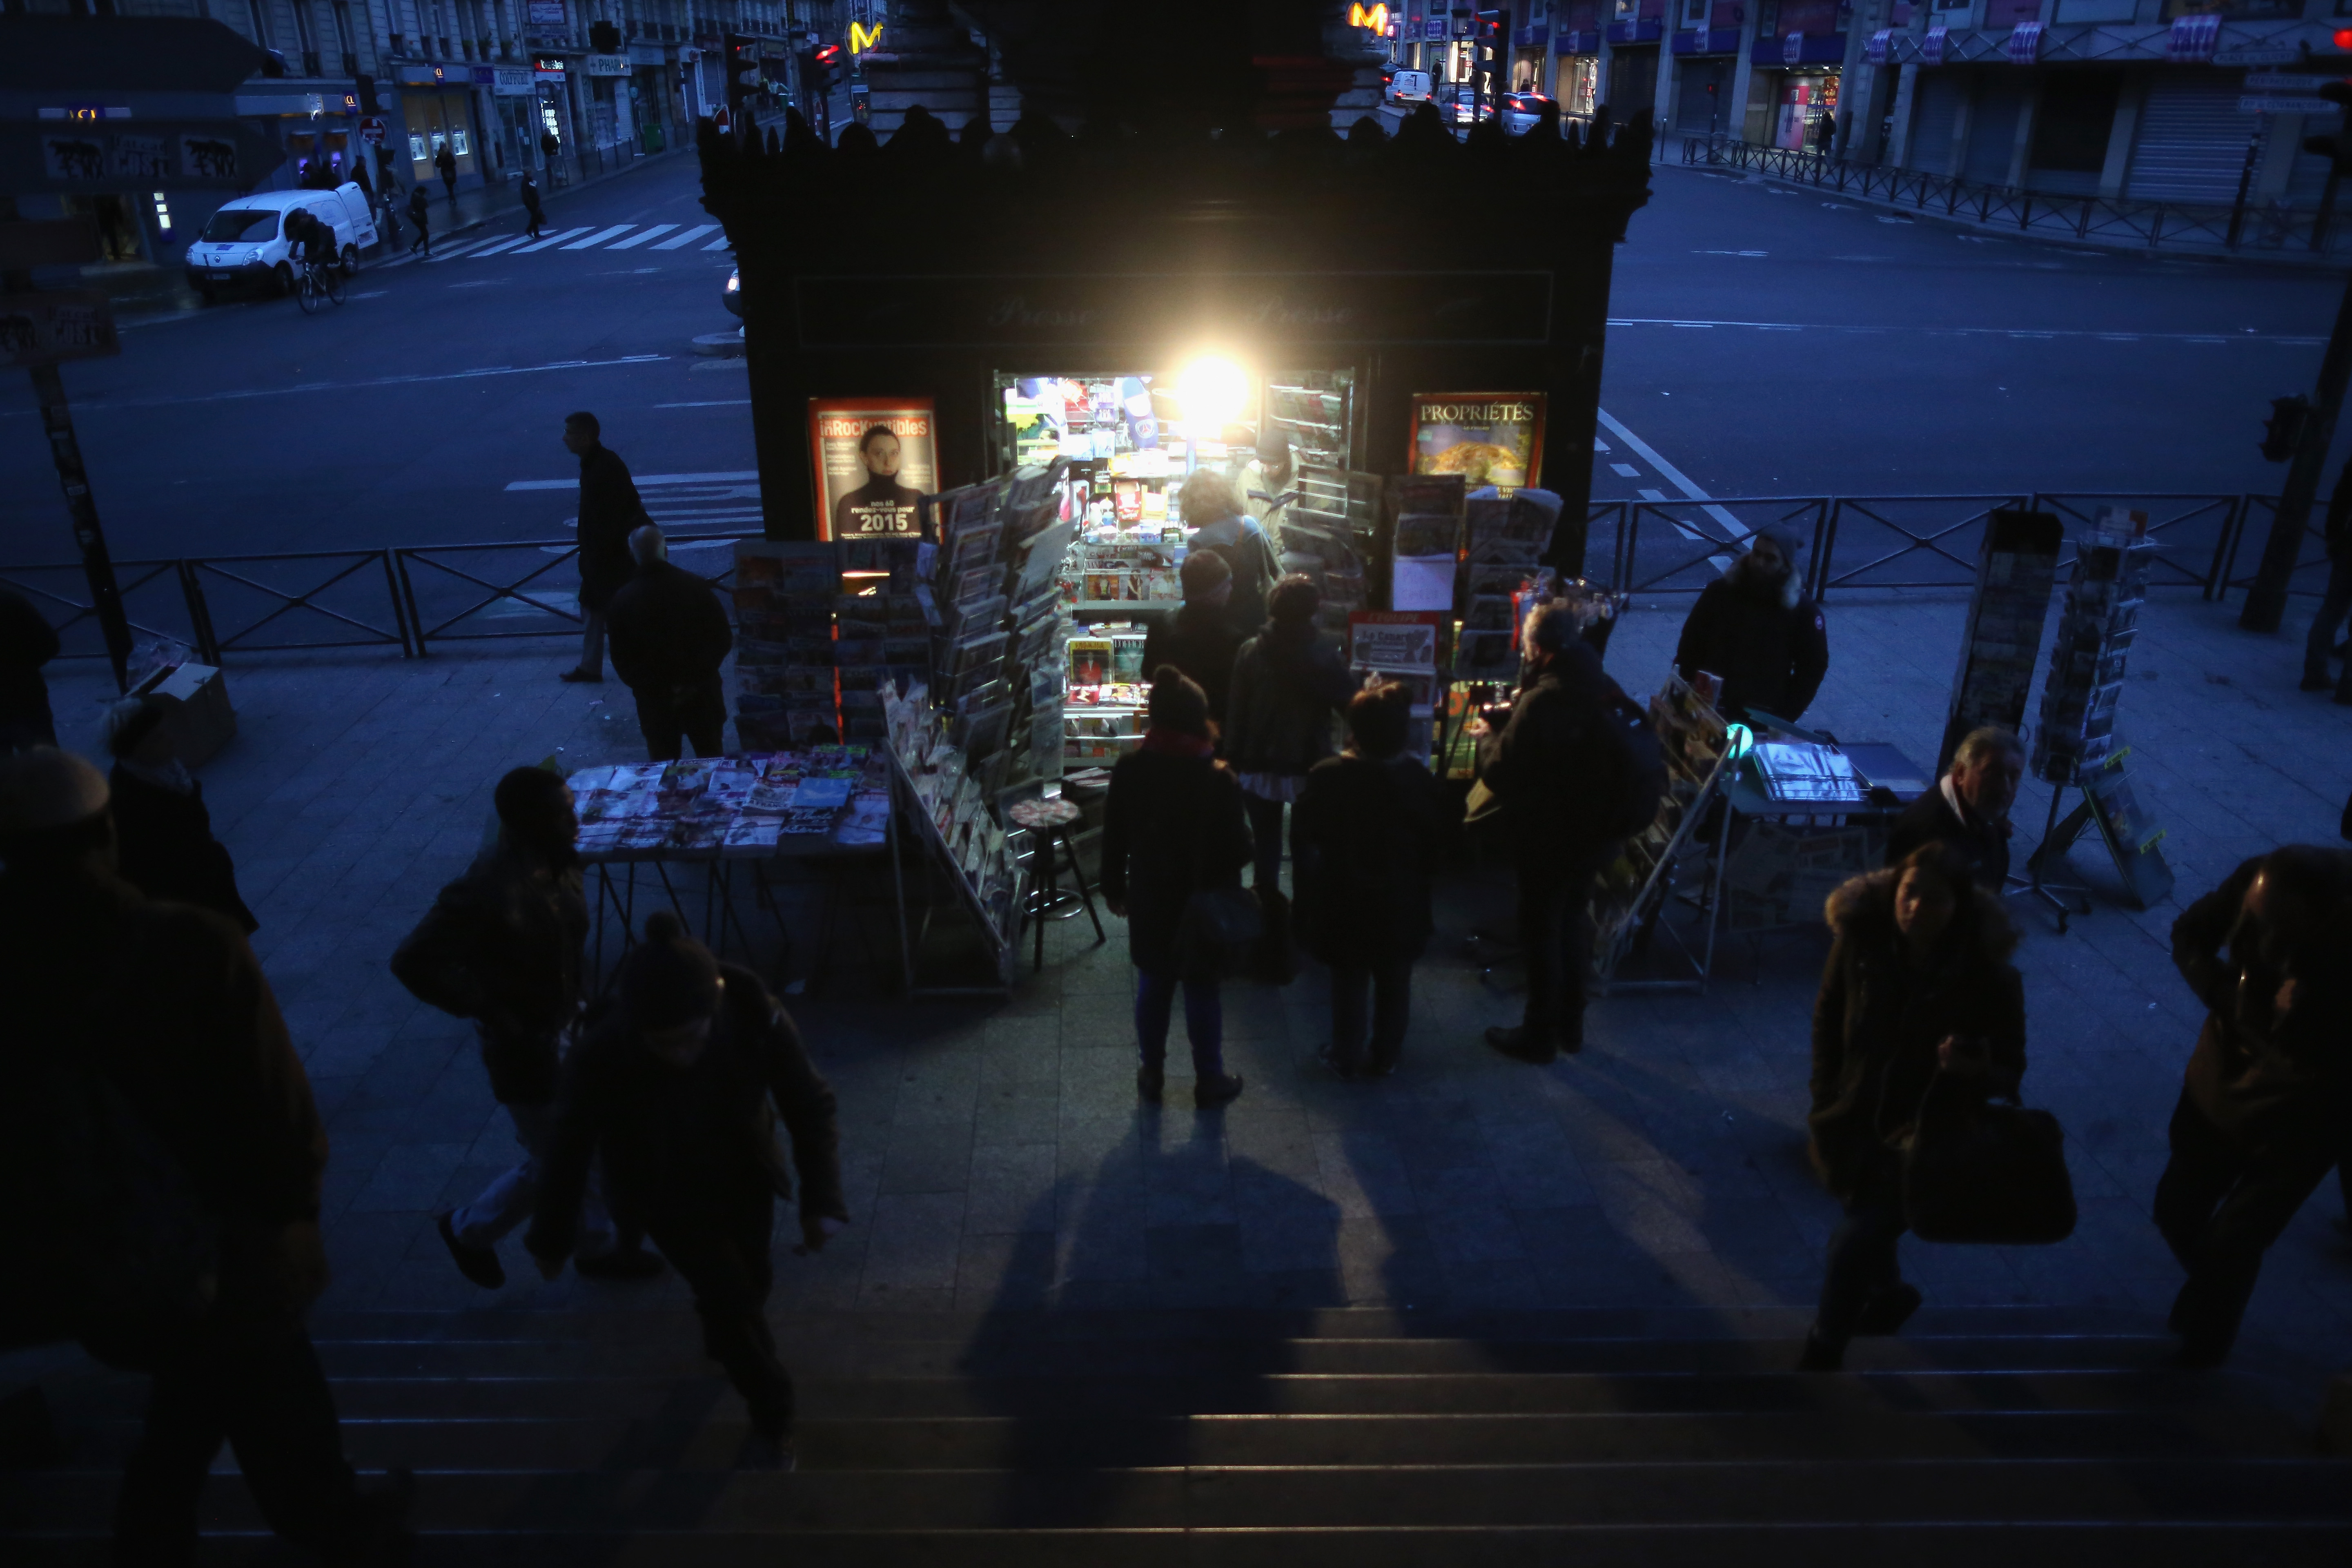 Parisians queue at a newspaper kiosk to get their copies of the latest edition of Charlie Hebdo magazine  on January 14, 2015 in Paris, France. Three million copies of the controversial magazine have been printed  in the wake of last weeks terrorist attacks. (Getty Images)